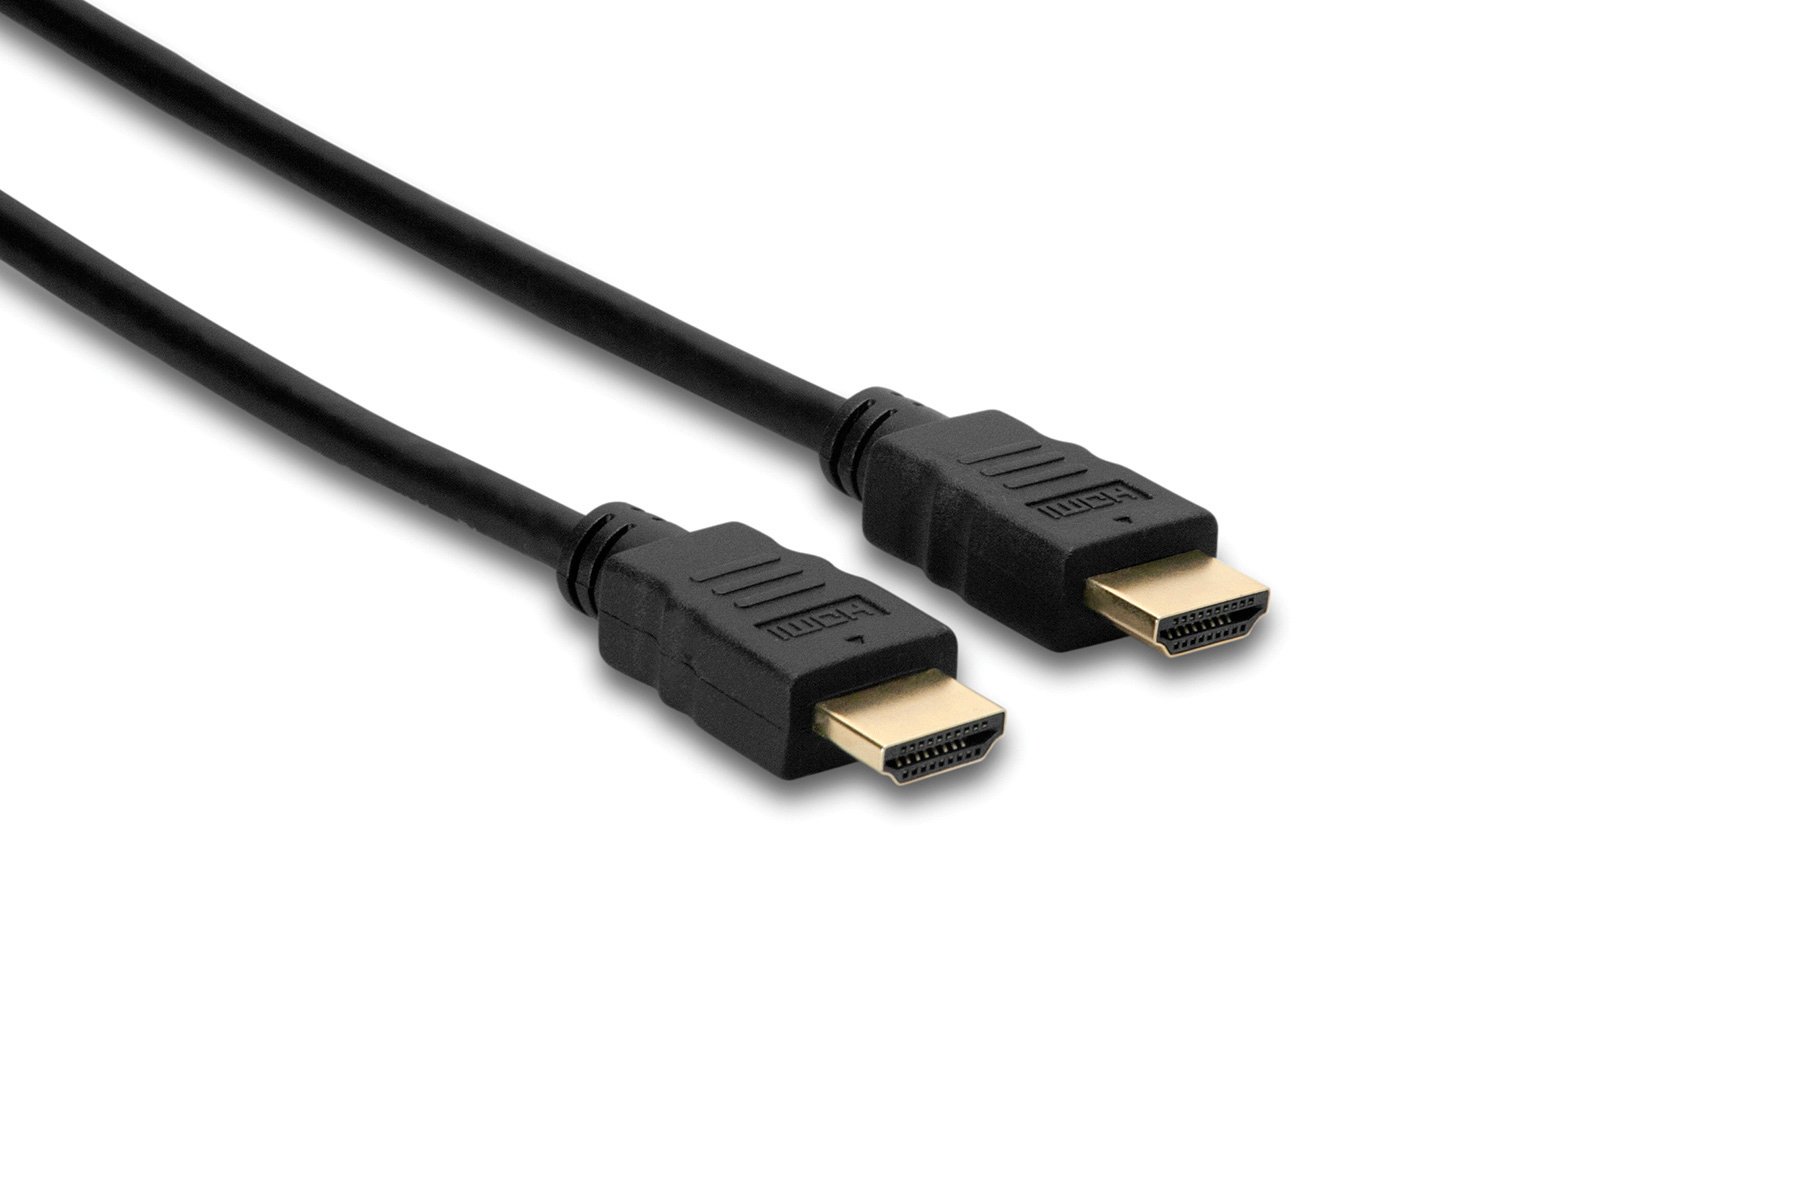 Photos - Cable (video, audio, USB) Hosa HDMA-425 25' HDMI to HDMI High Speed Video Cable with Ethernet 